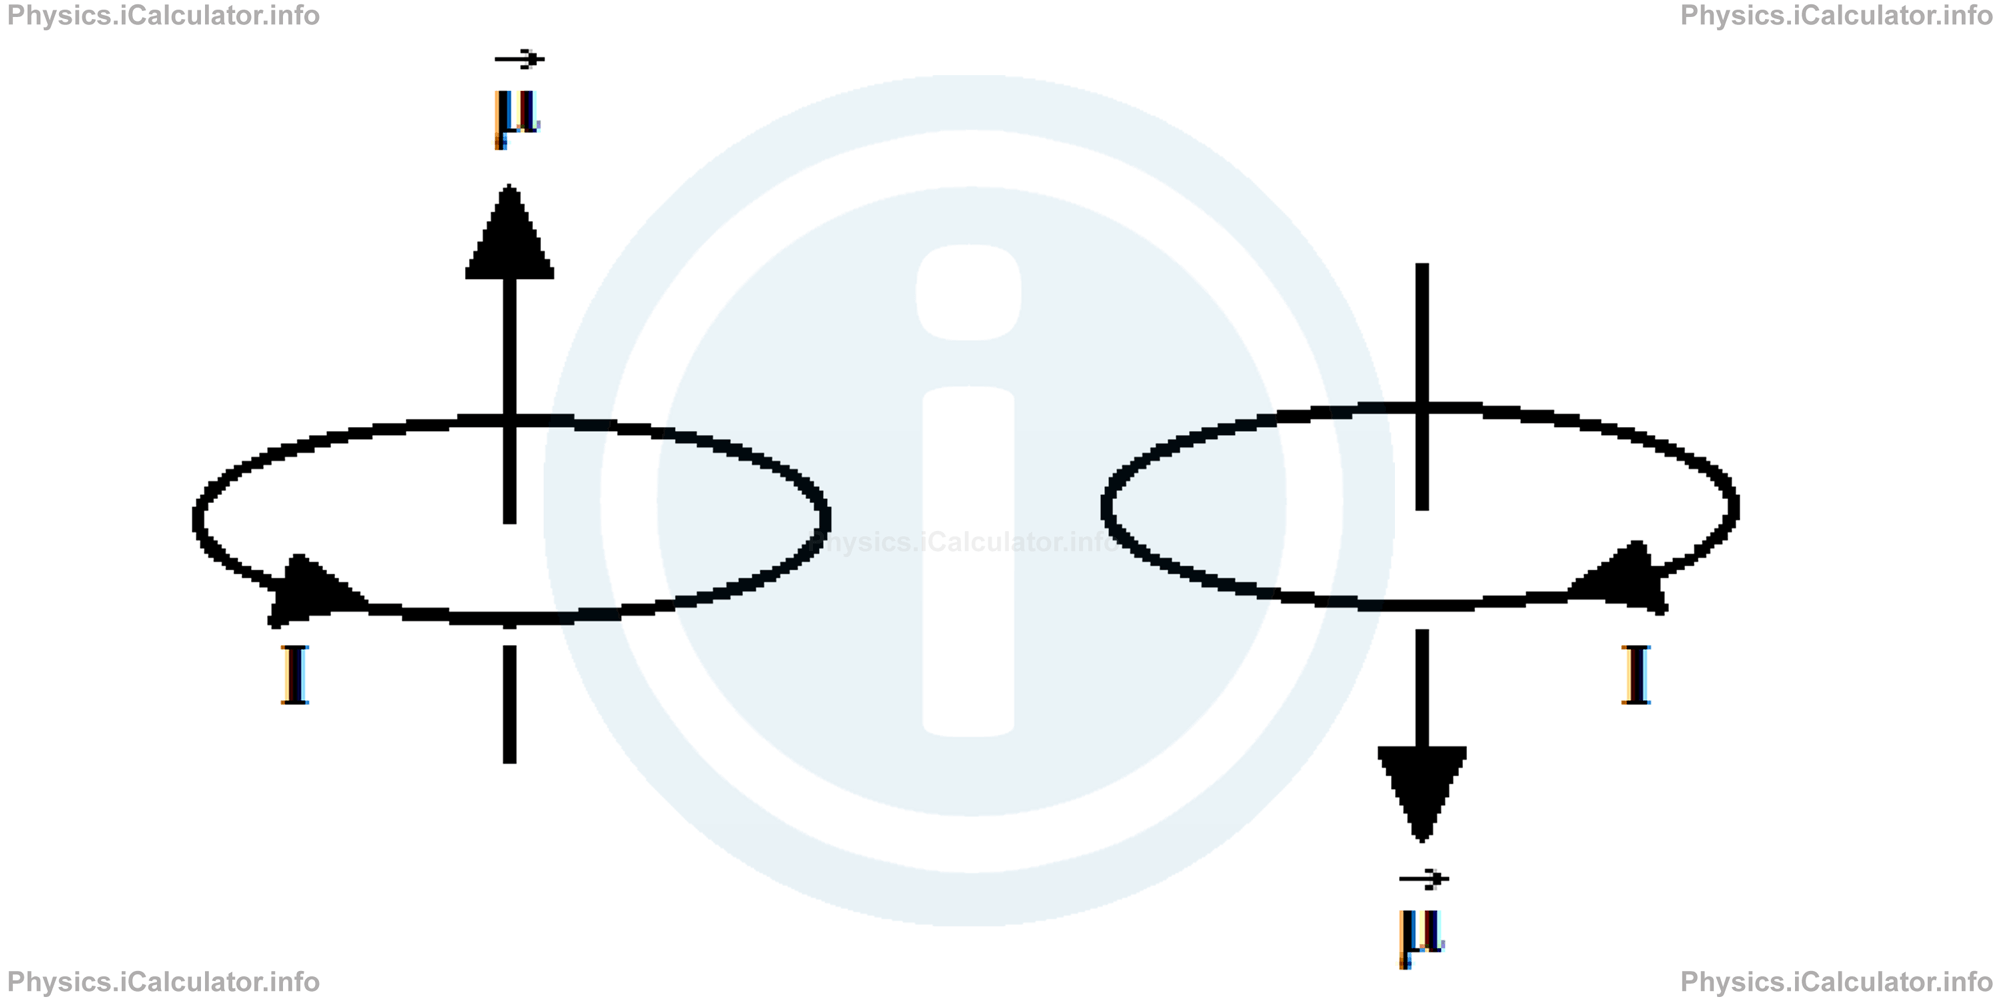 Physics Tutorials: This image provides visual information for the physics tutorial Magnetic Dipole Moment 